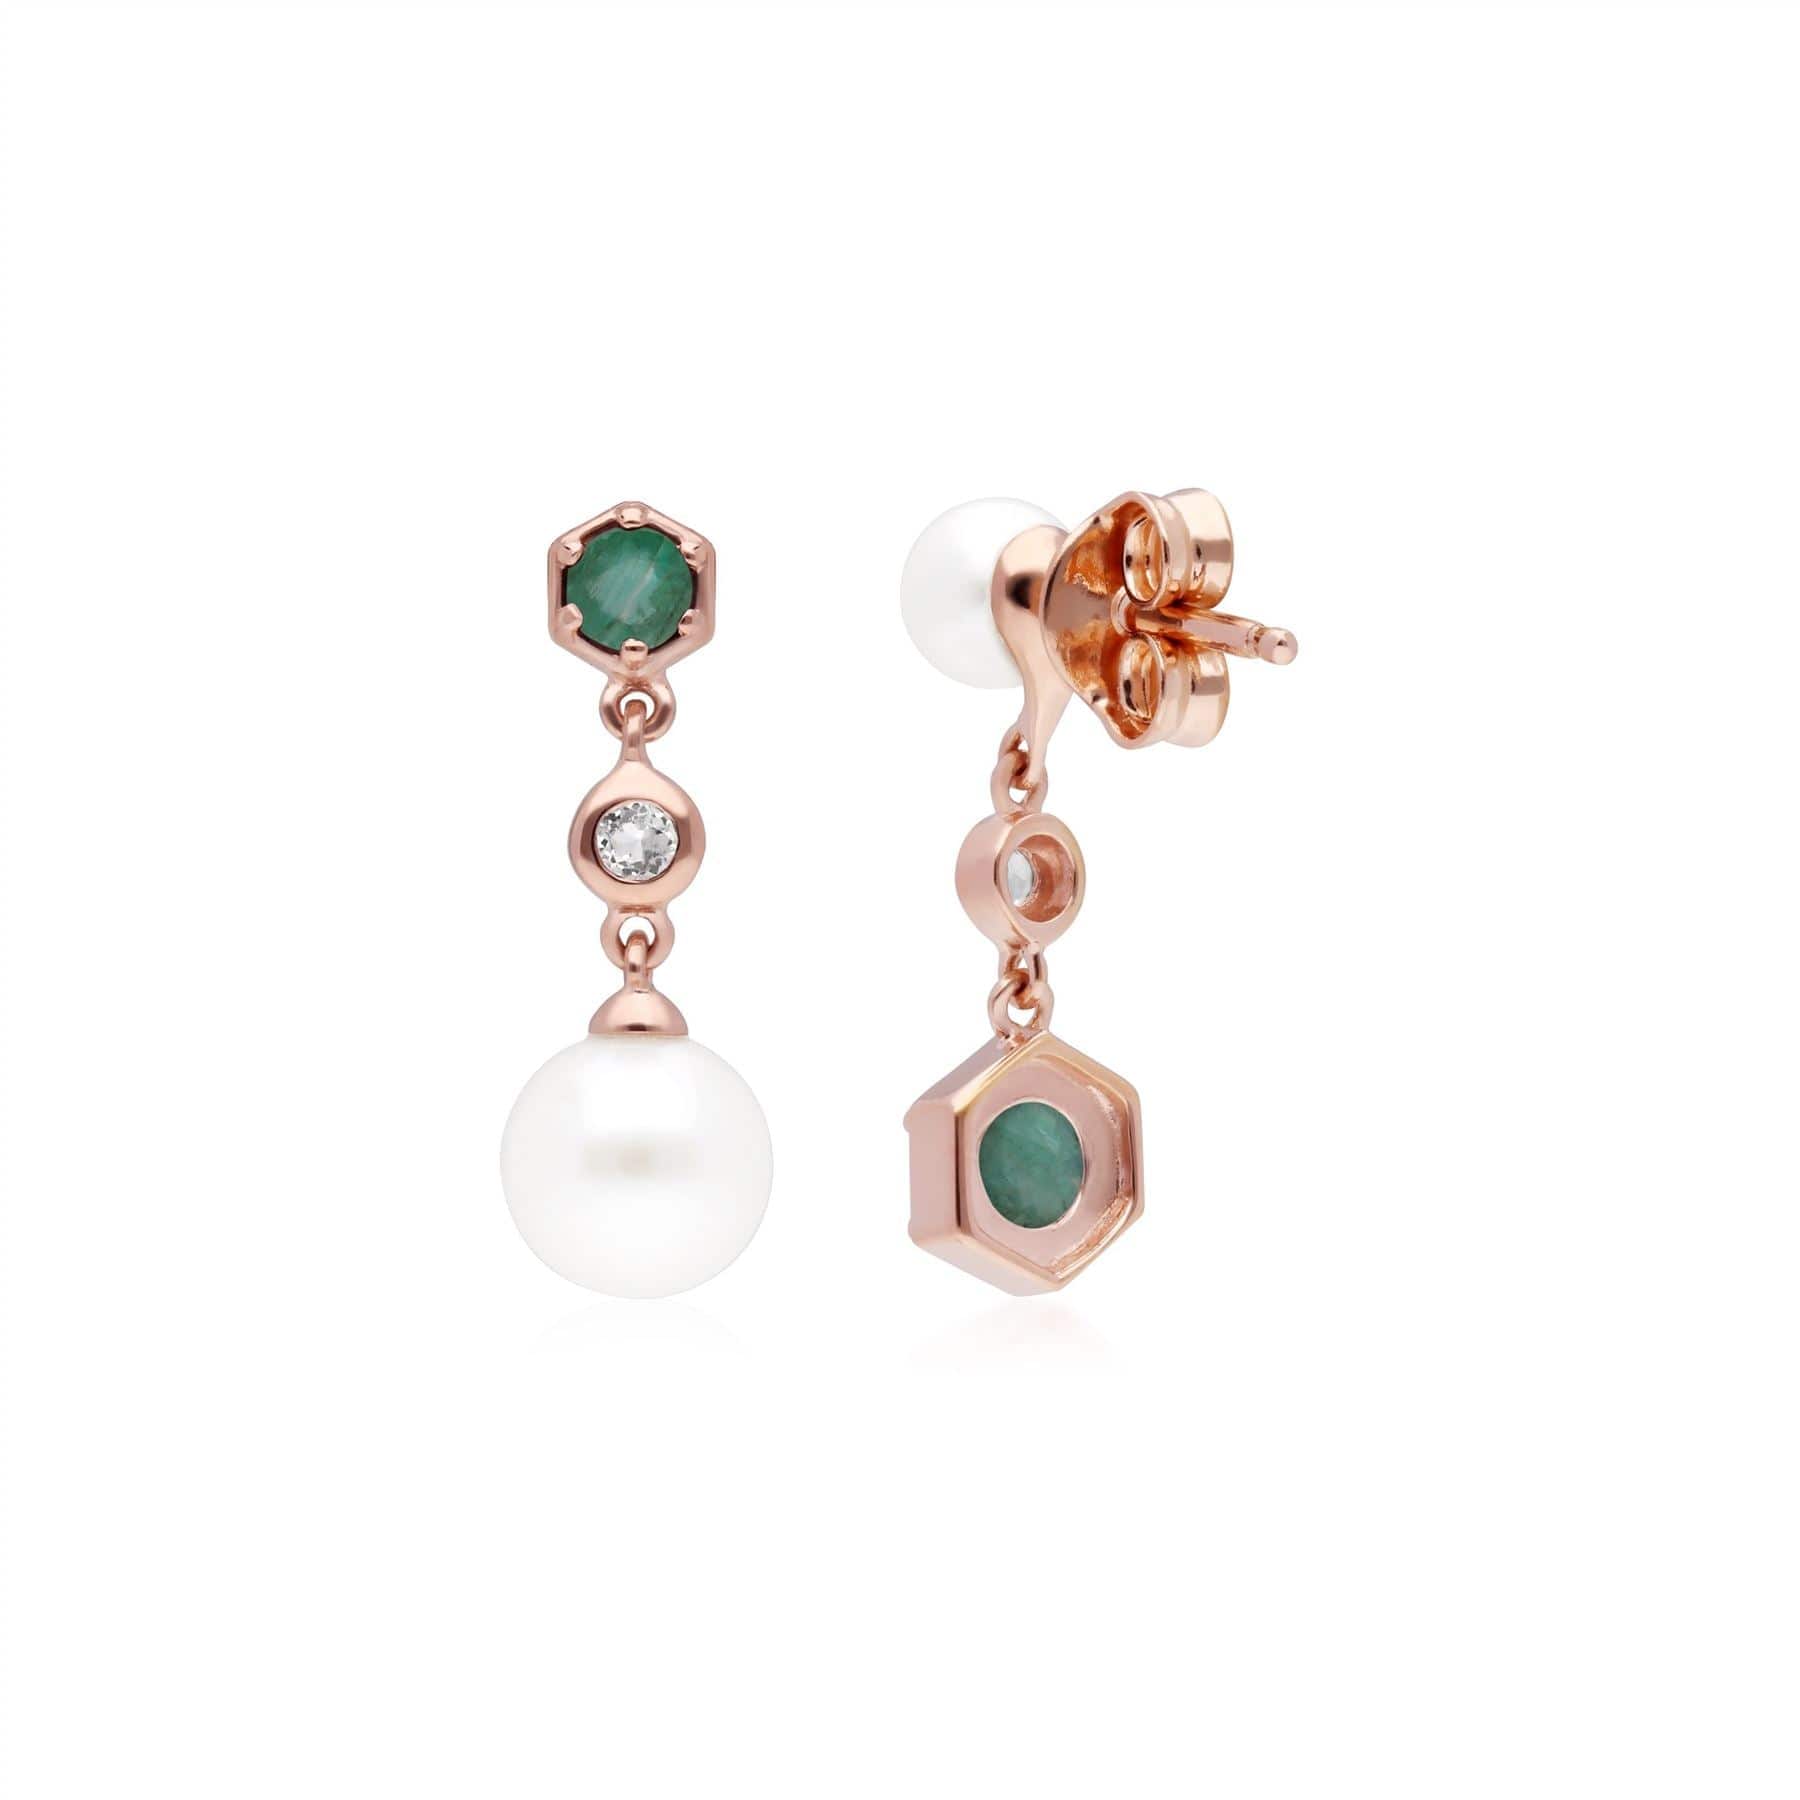 Modern Pearl, Emerald & Topaz Mismatched Drop Earrings in Rose Gold Plated Sterling Silver 1